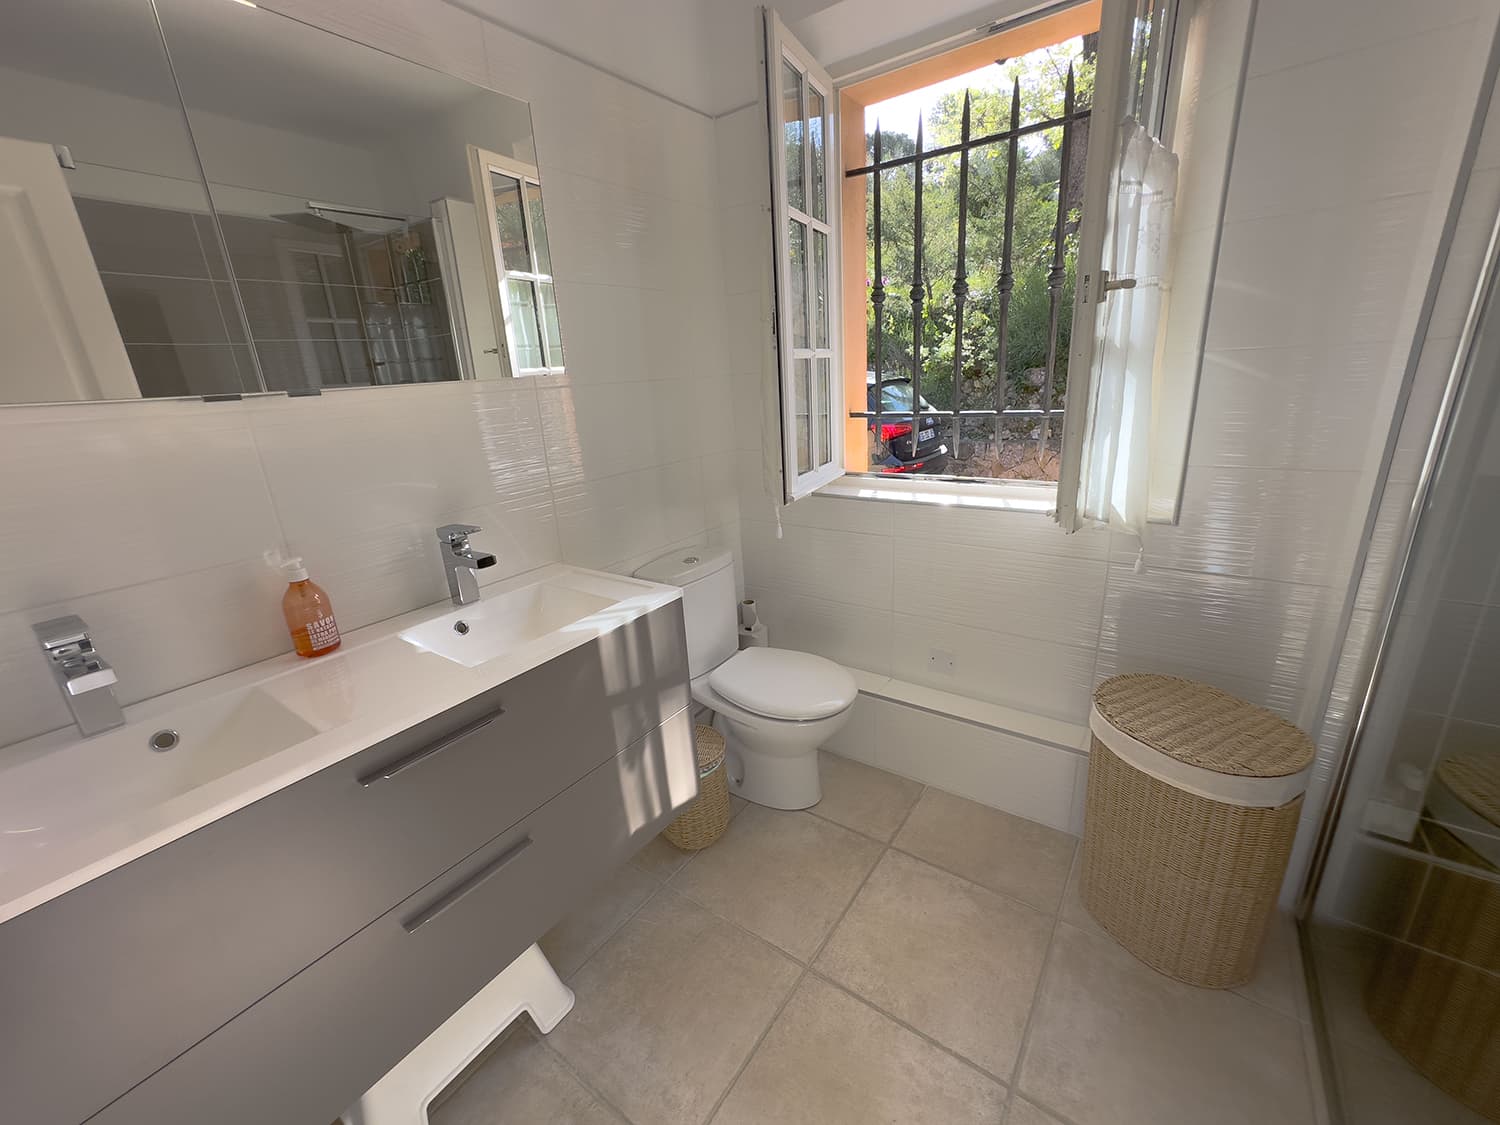 Bathroom | Holiday home in the Var